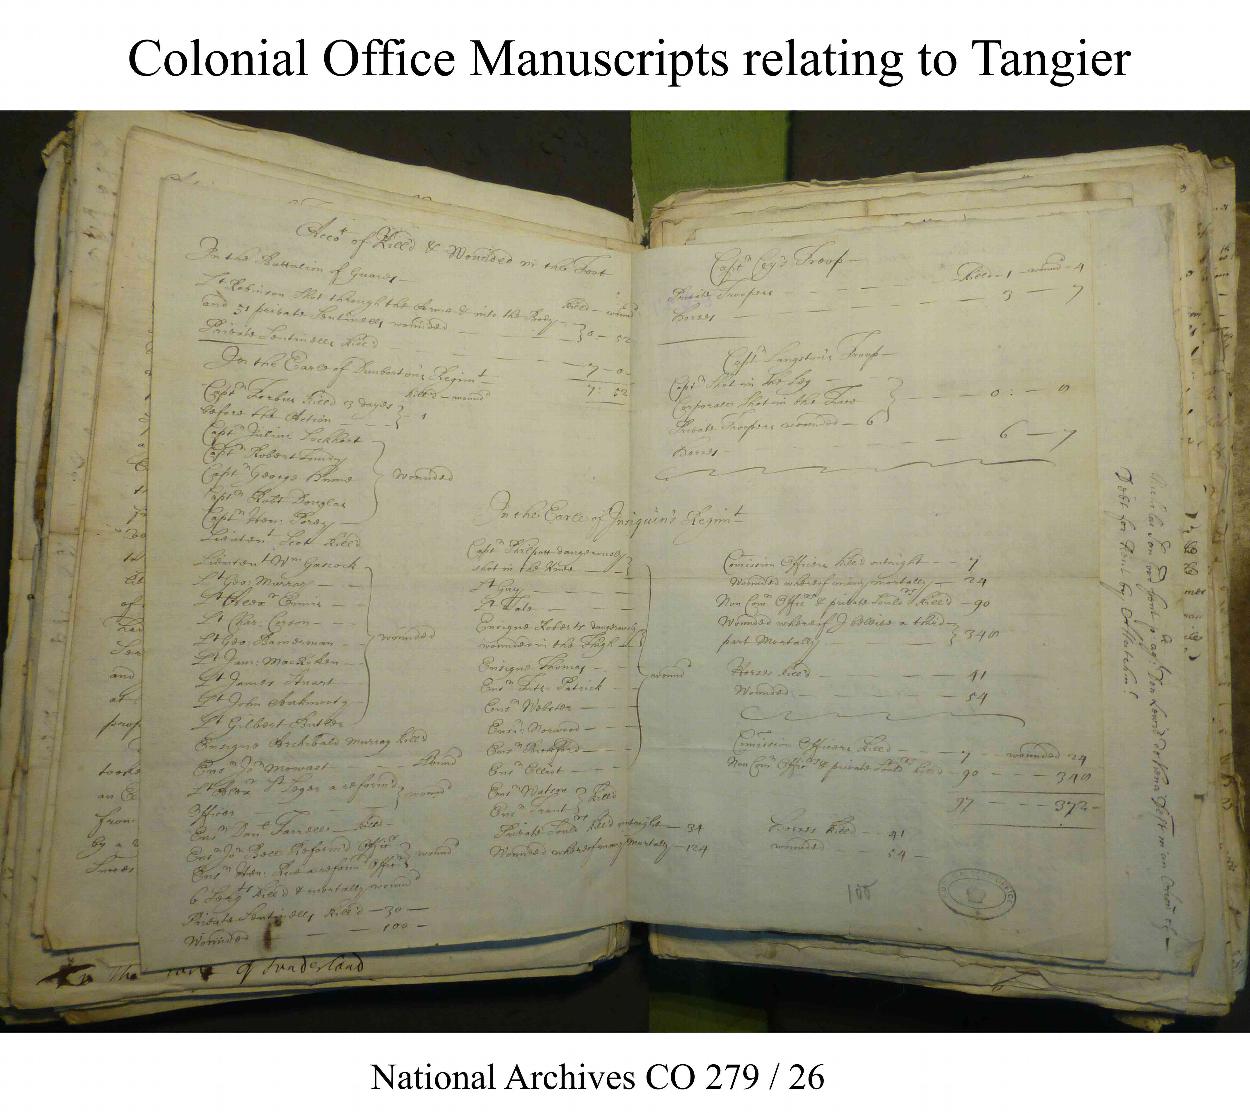 Colonial office manuscripts with information relating to Tangier